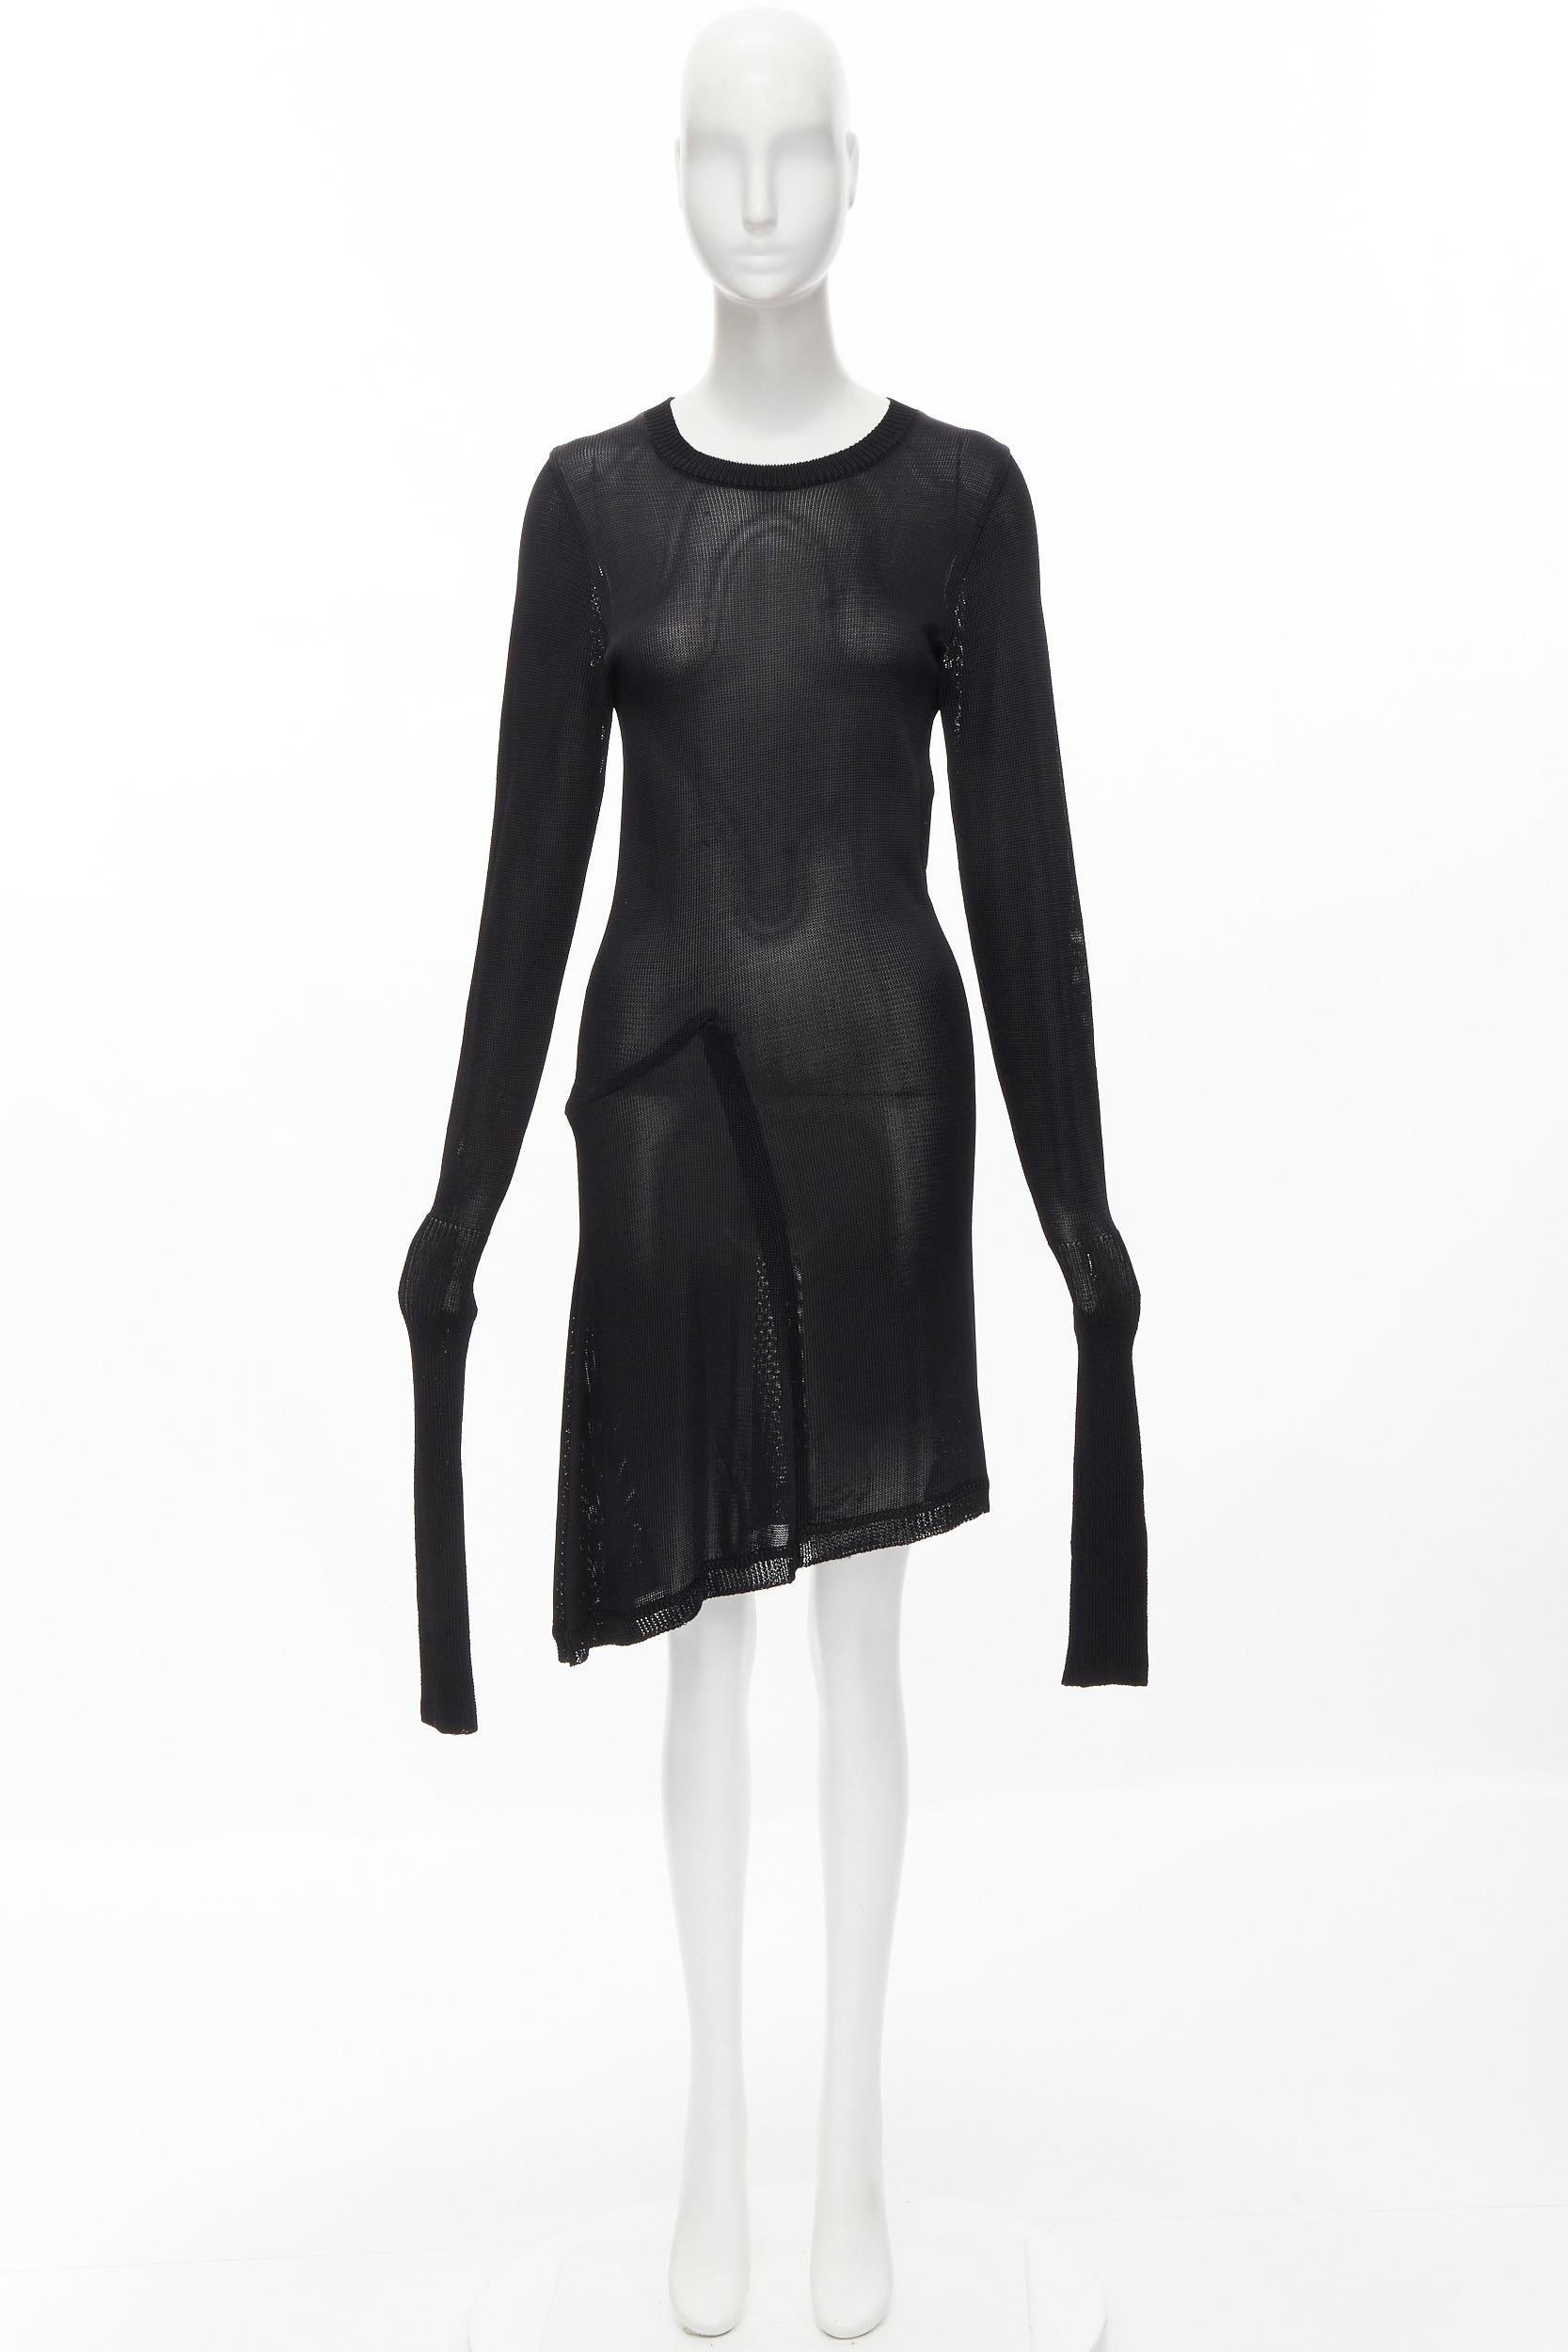 COMME DES GARCONS Vintage 1980s black knitted extra long sleeves sweater dress For Sale 5